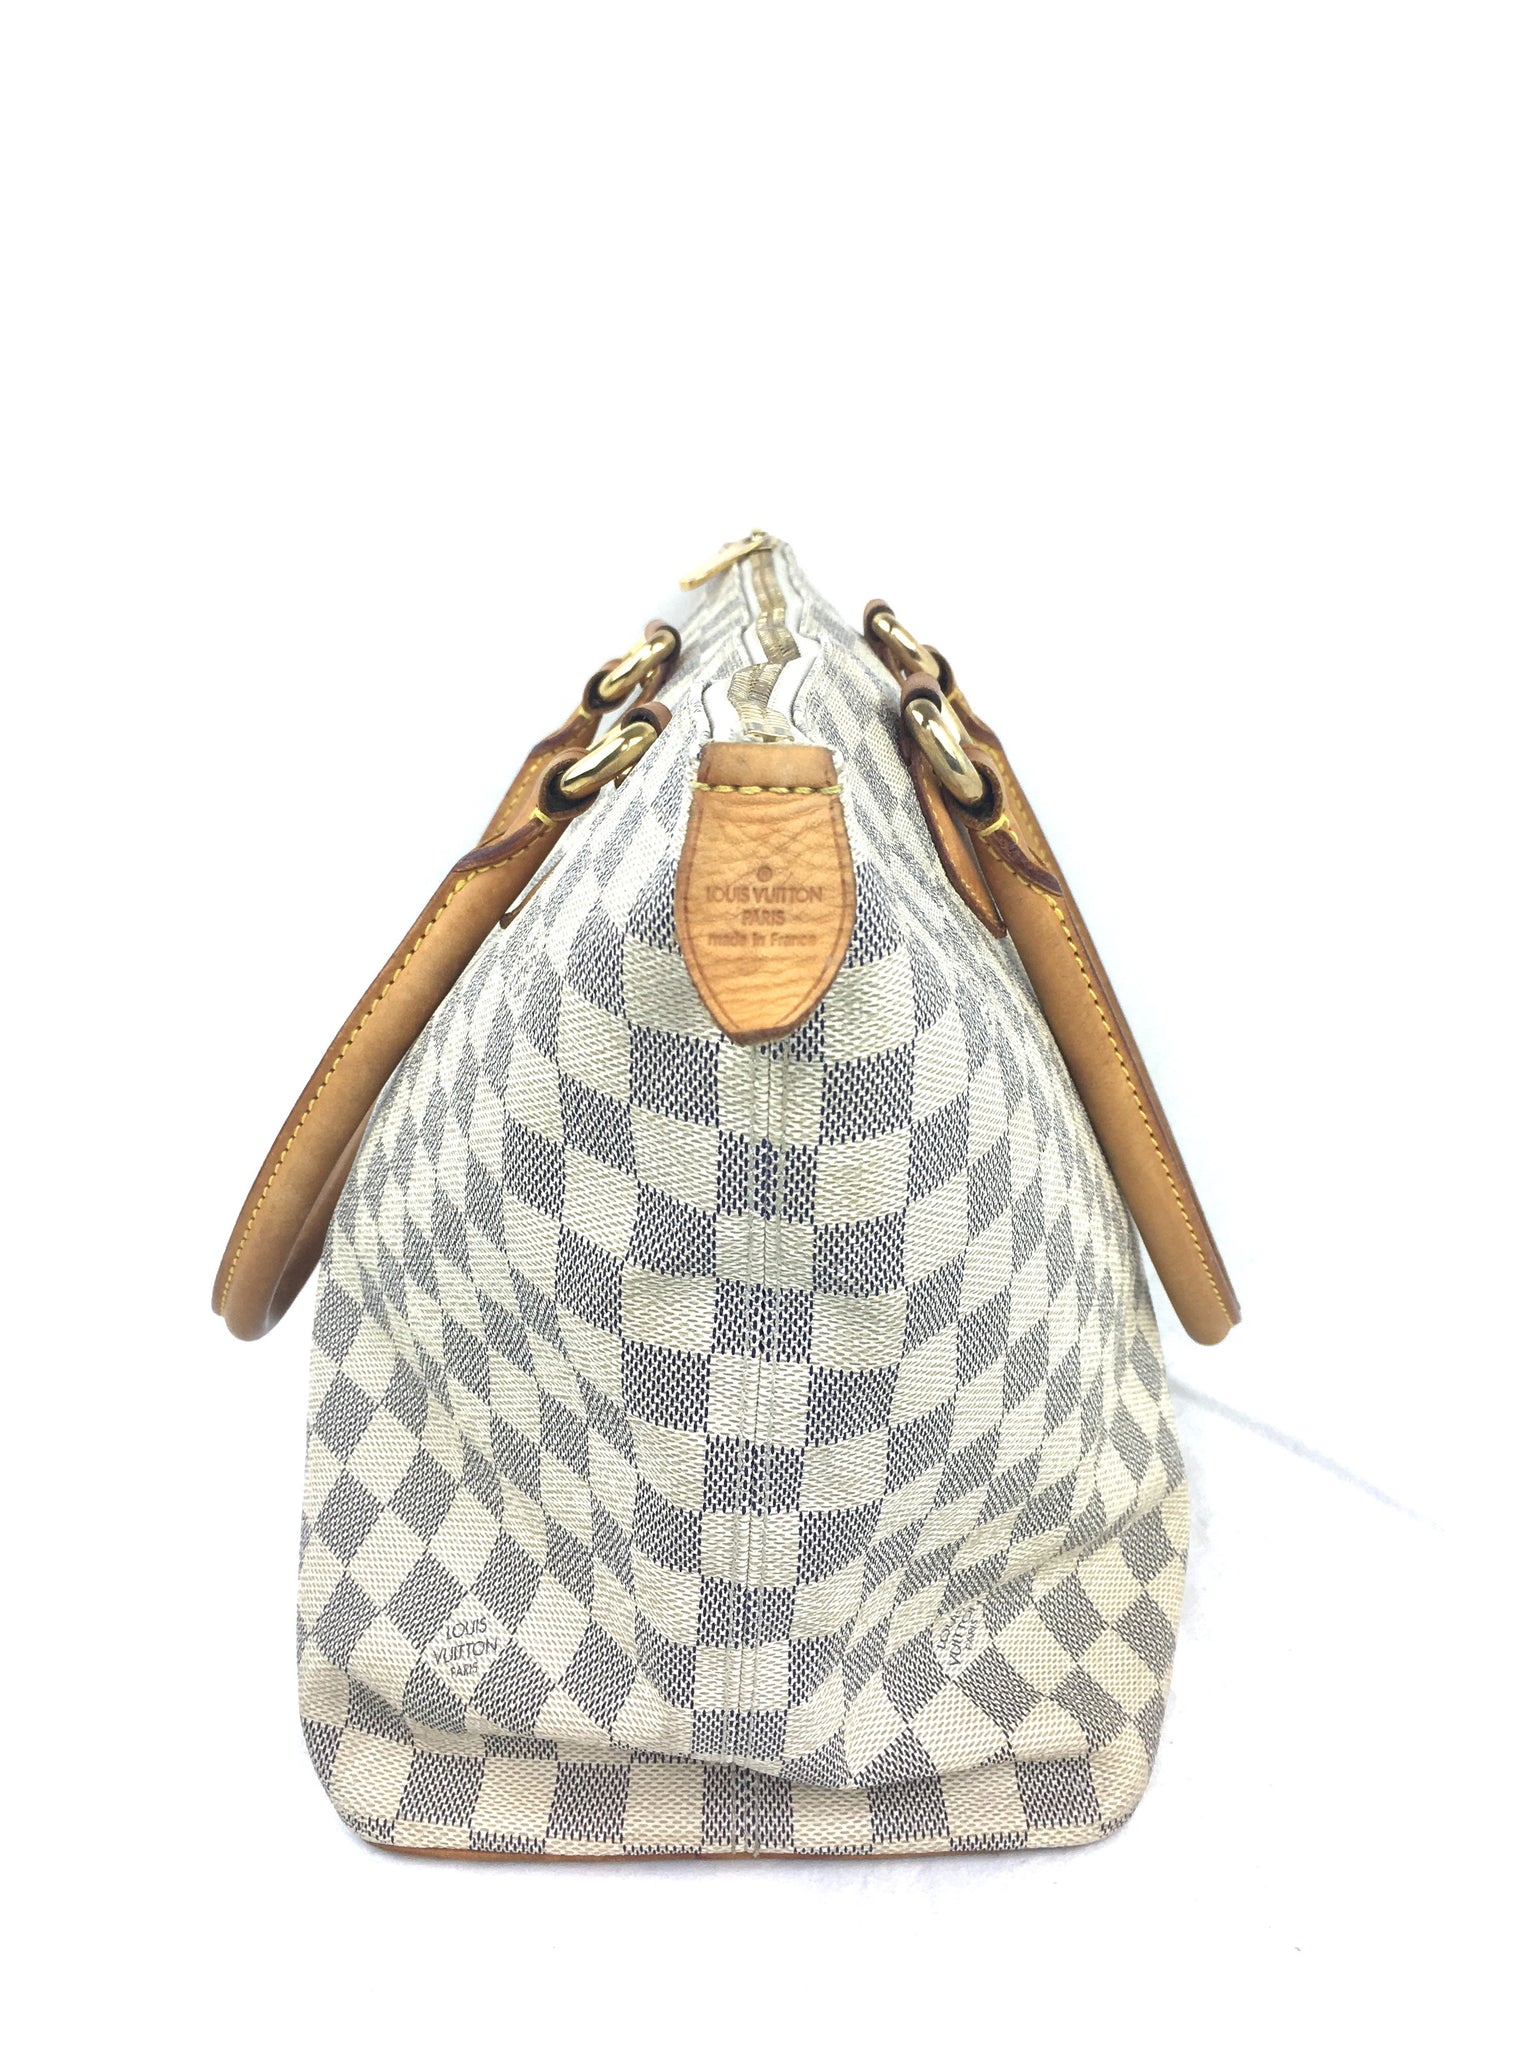 Authentic Louis Vuitton top handle bag in monogram canvas with free twilly